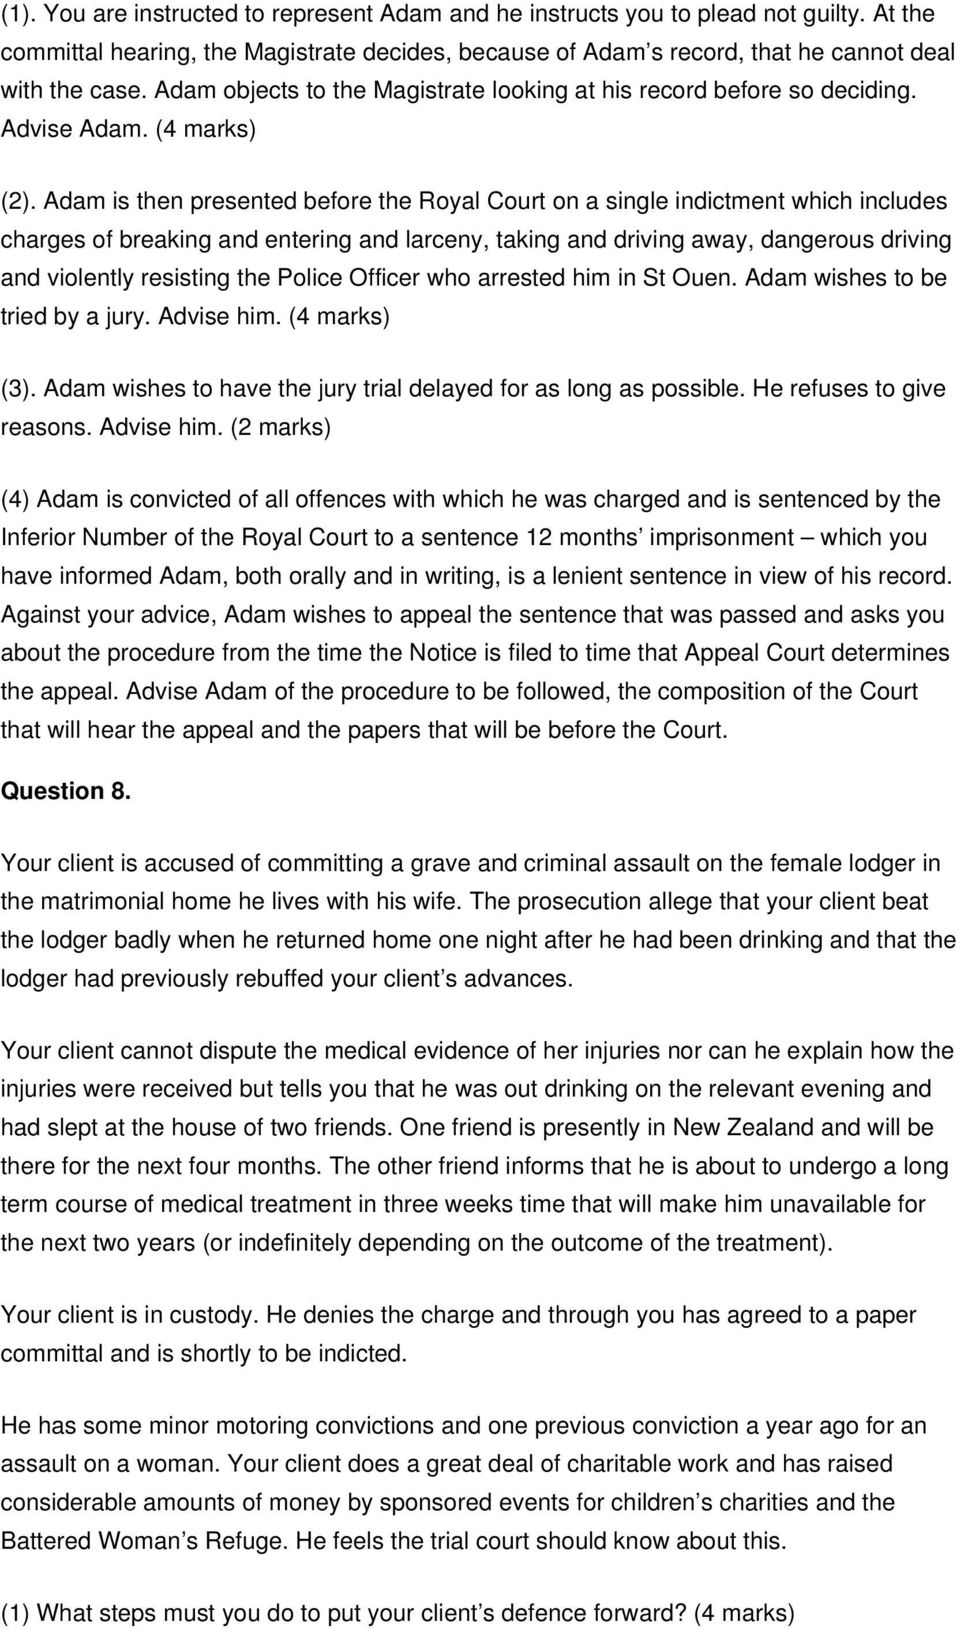 Adam is then presented before the Royal Court on a single indictment which includes charges of breaking and entering and larceny, taking and driving away, dangerous driving and violently resisting